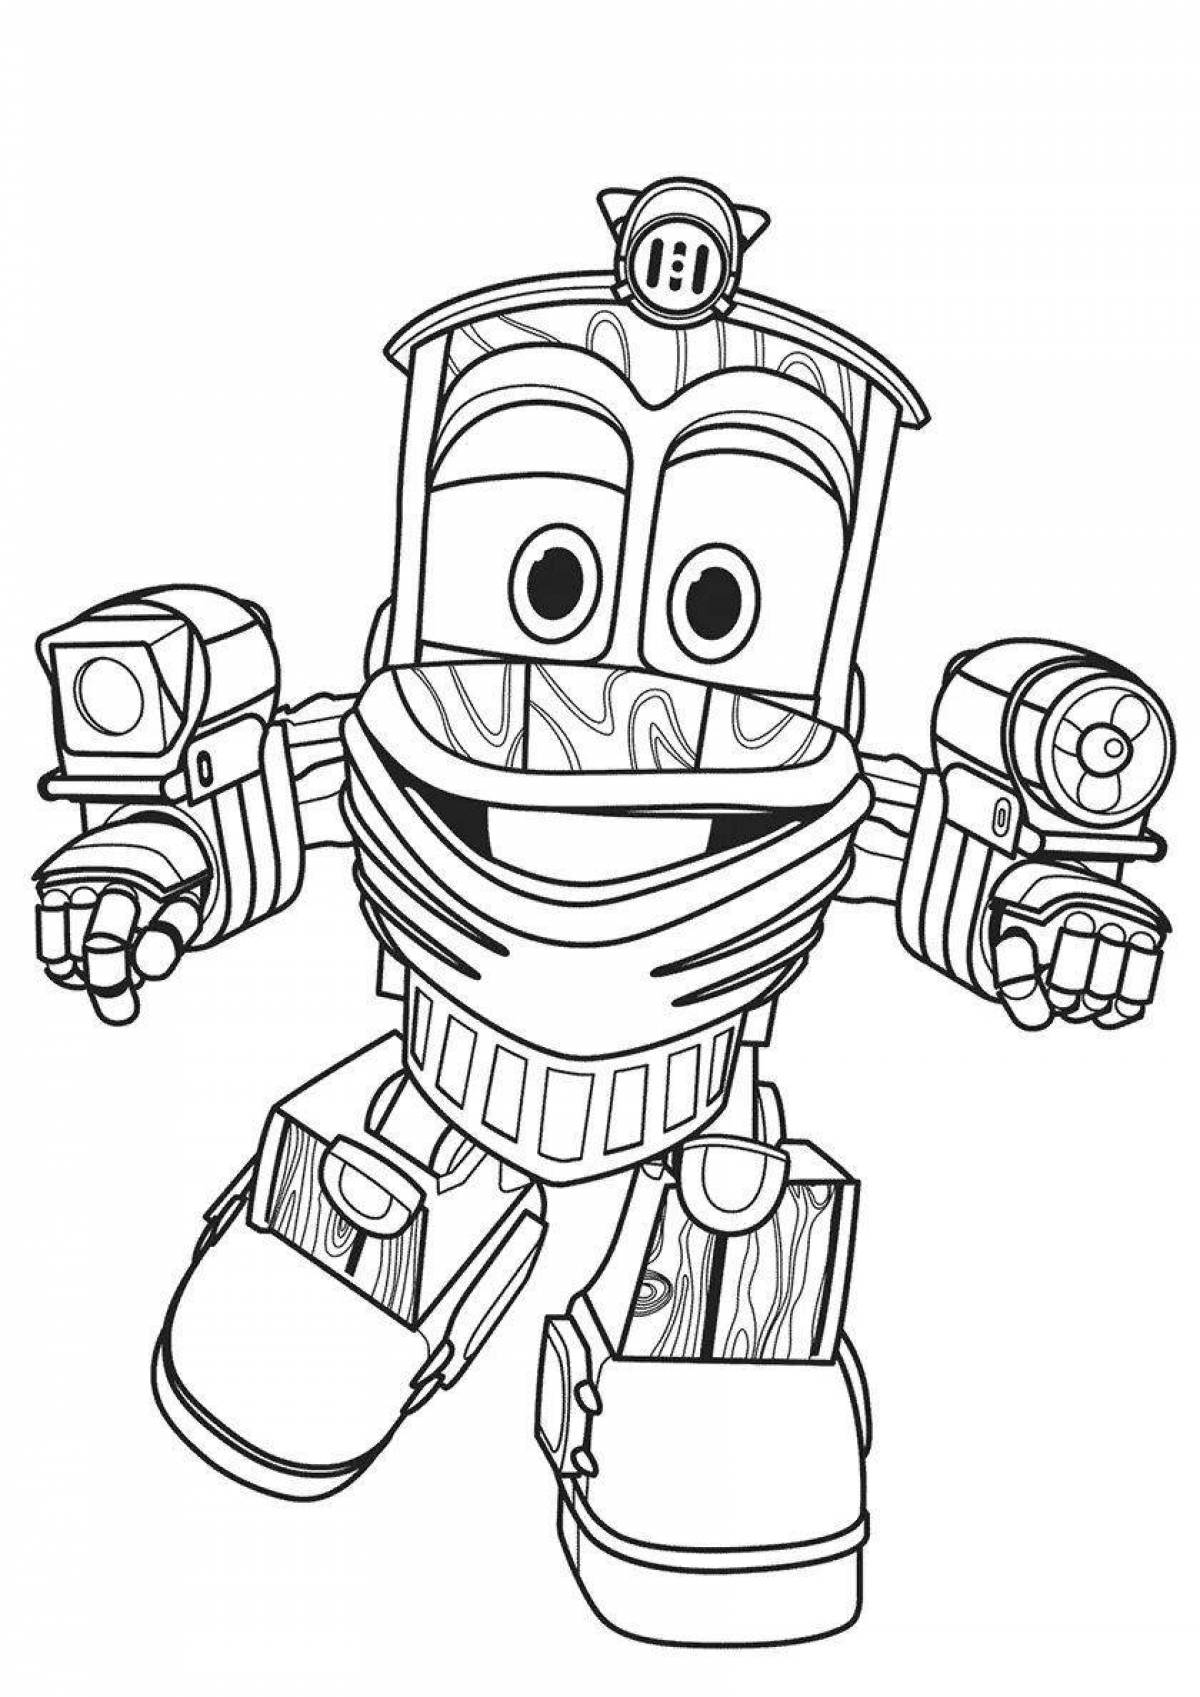 Exciting coloring page of victor's train robots